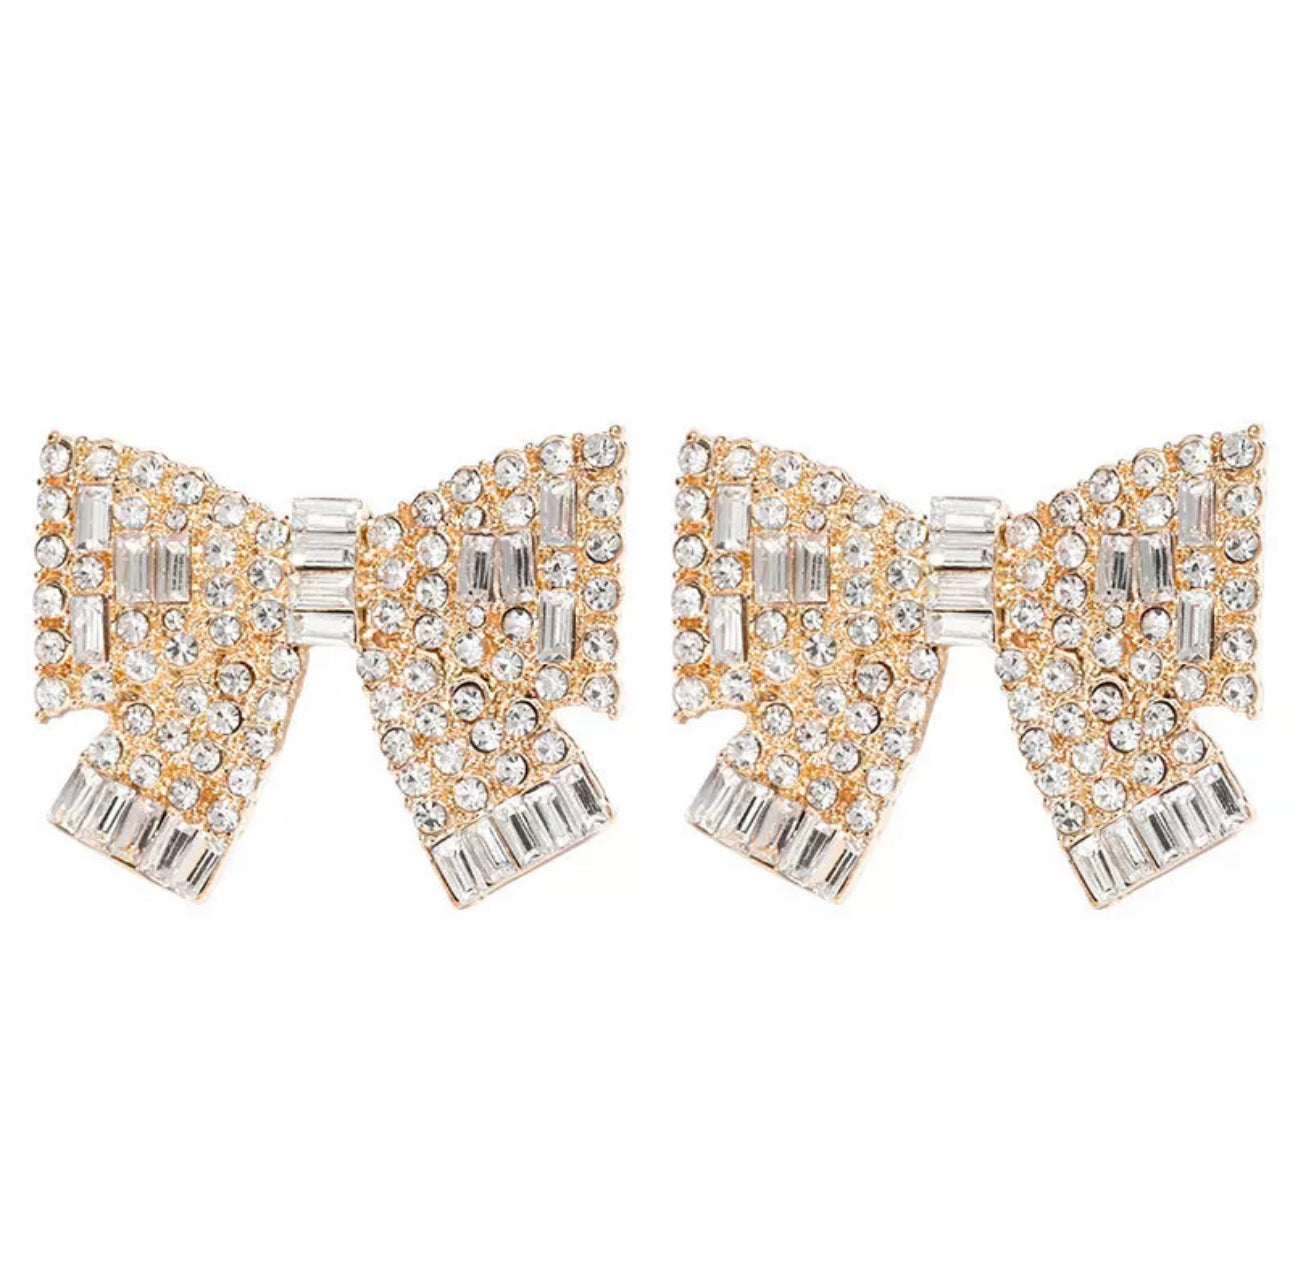 Gold Bow Earrings with CZ Embellishment 